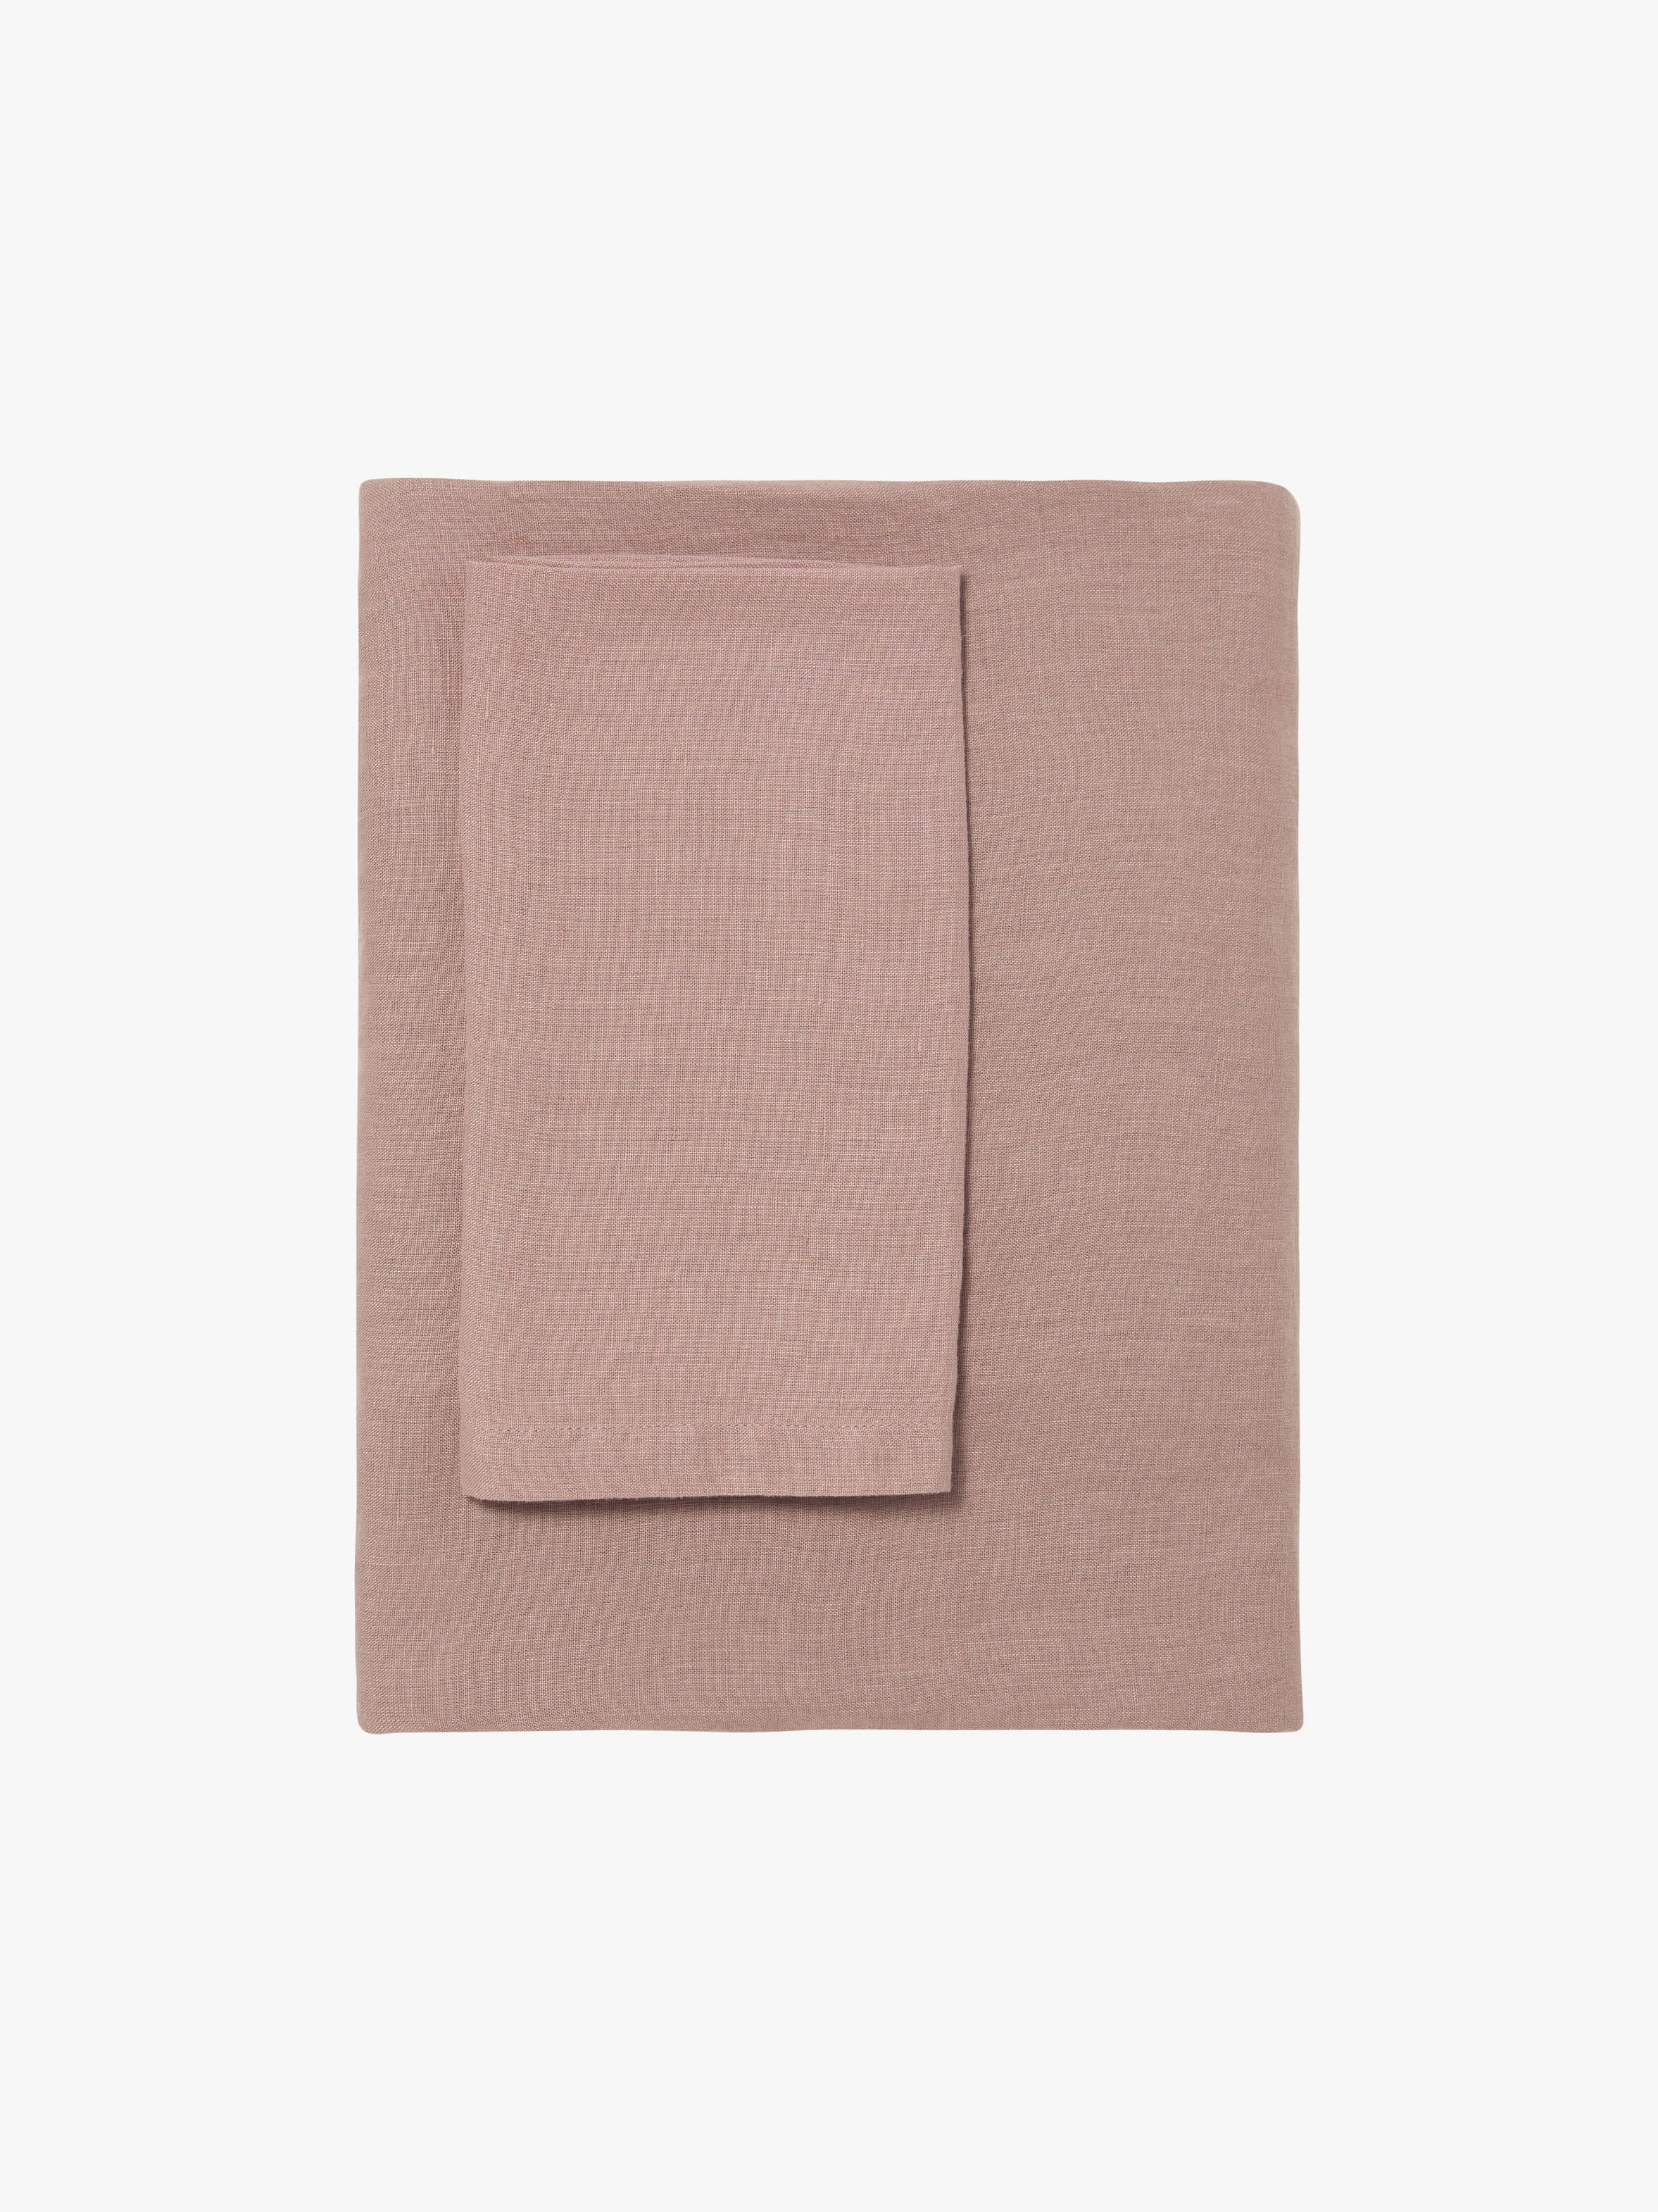 Moss Rose French Linen Table Cloth